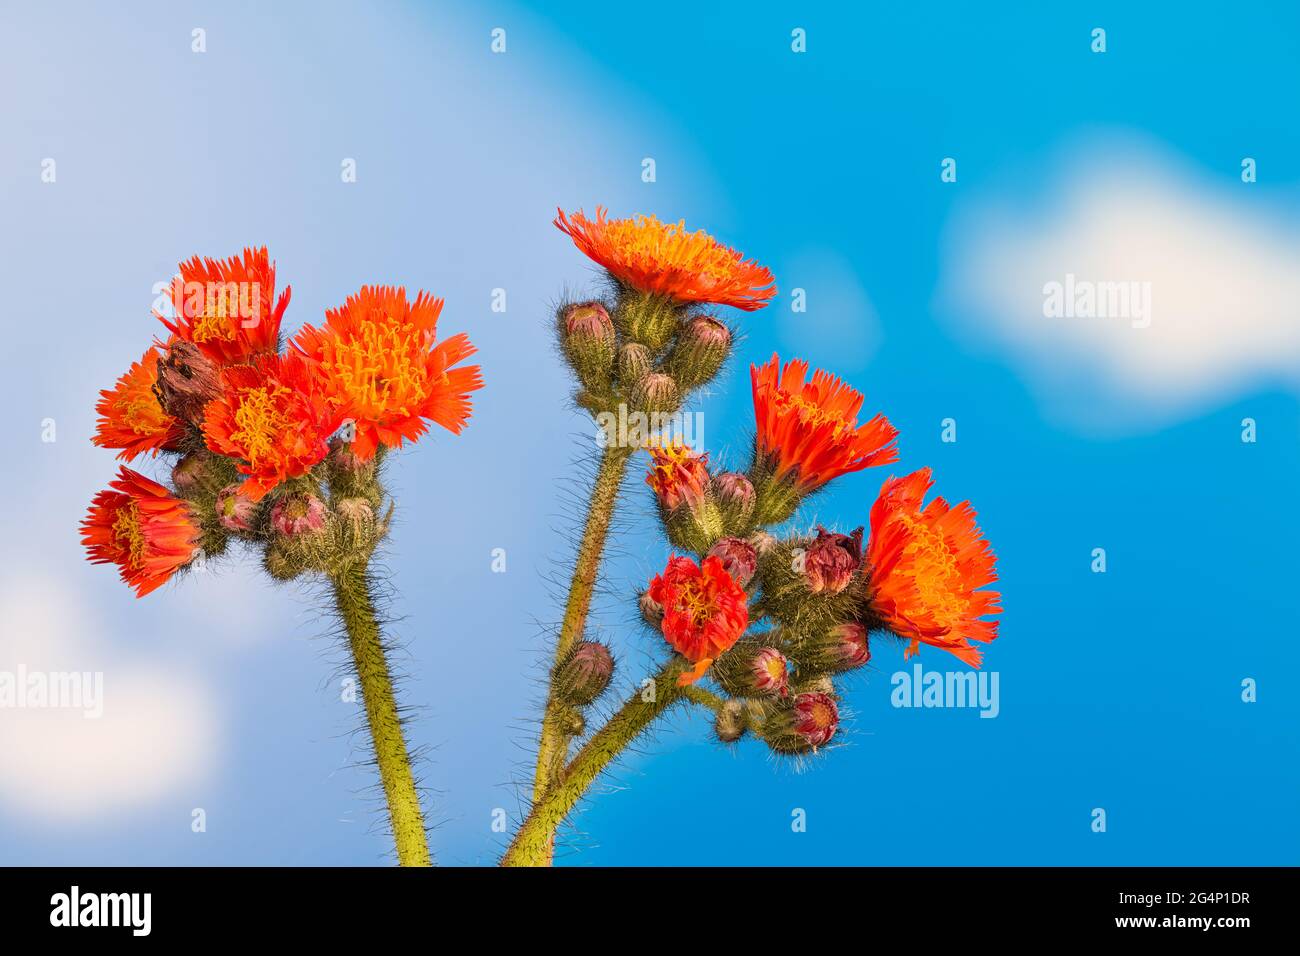 Orange hawkweed blooms and buds on blue sky background. Beautiful detail of ornamental plant. Clusters of flowers arranged on green hairy stems. Eco. Stock Photo